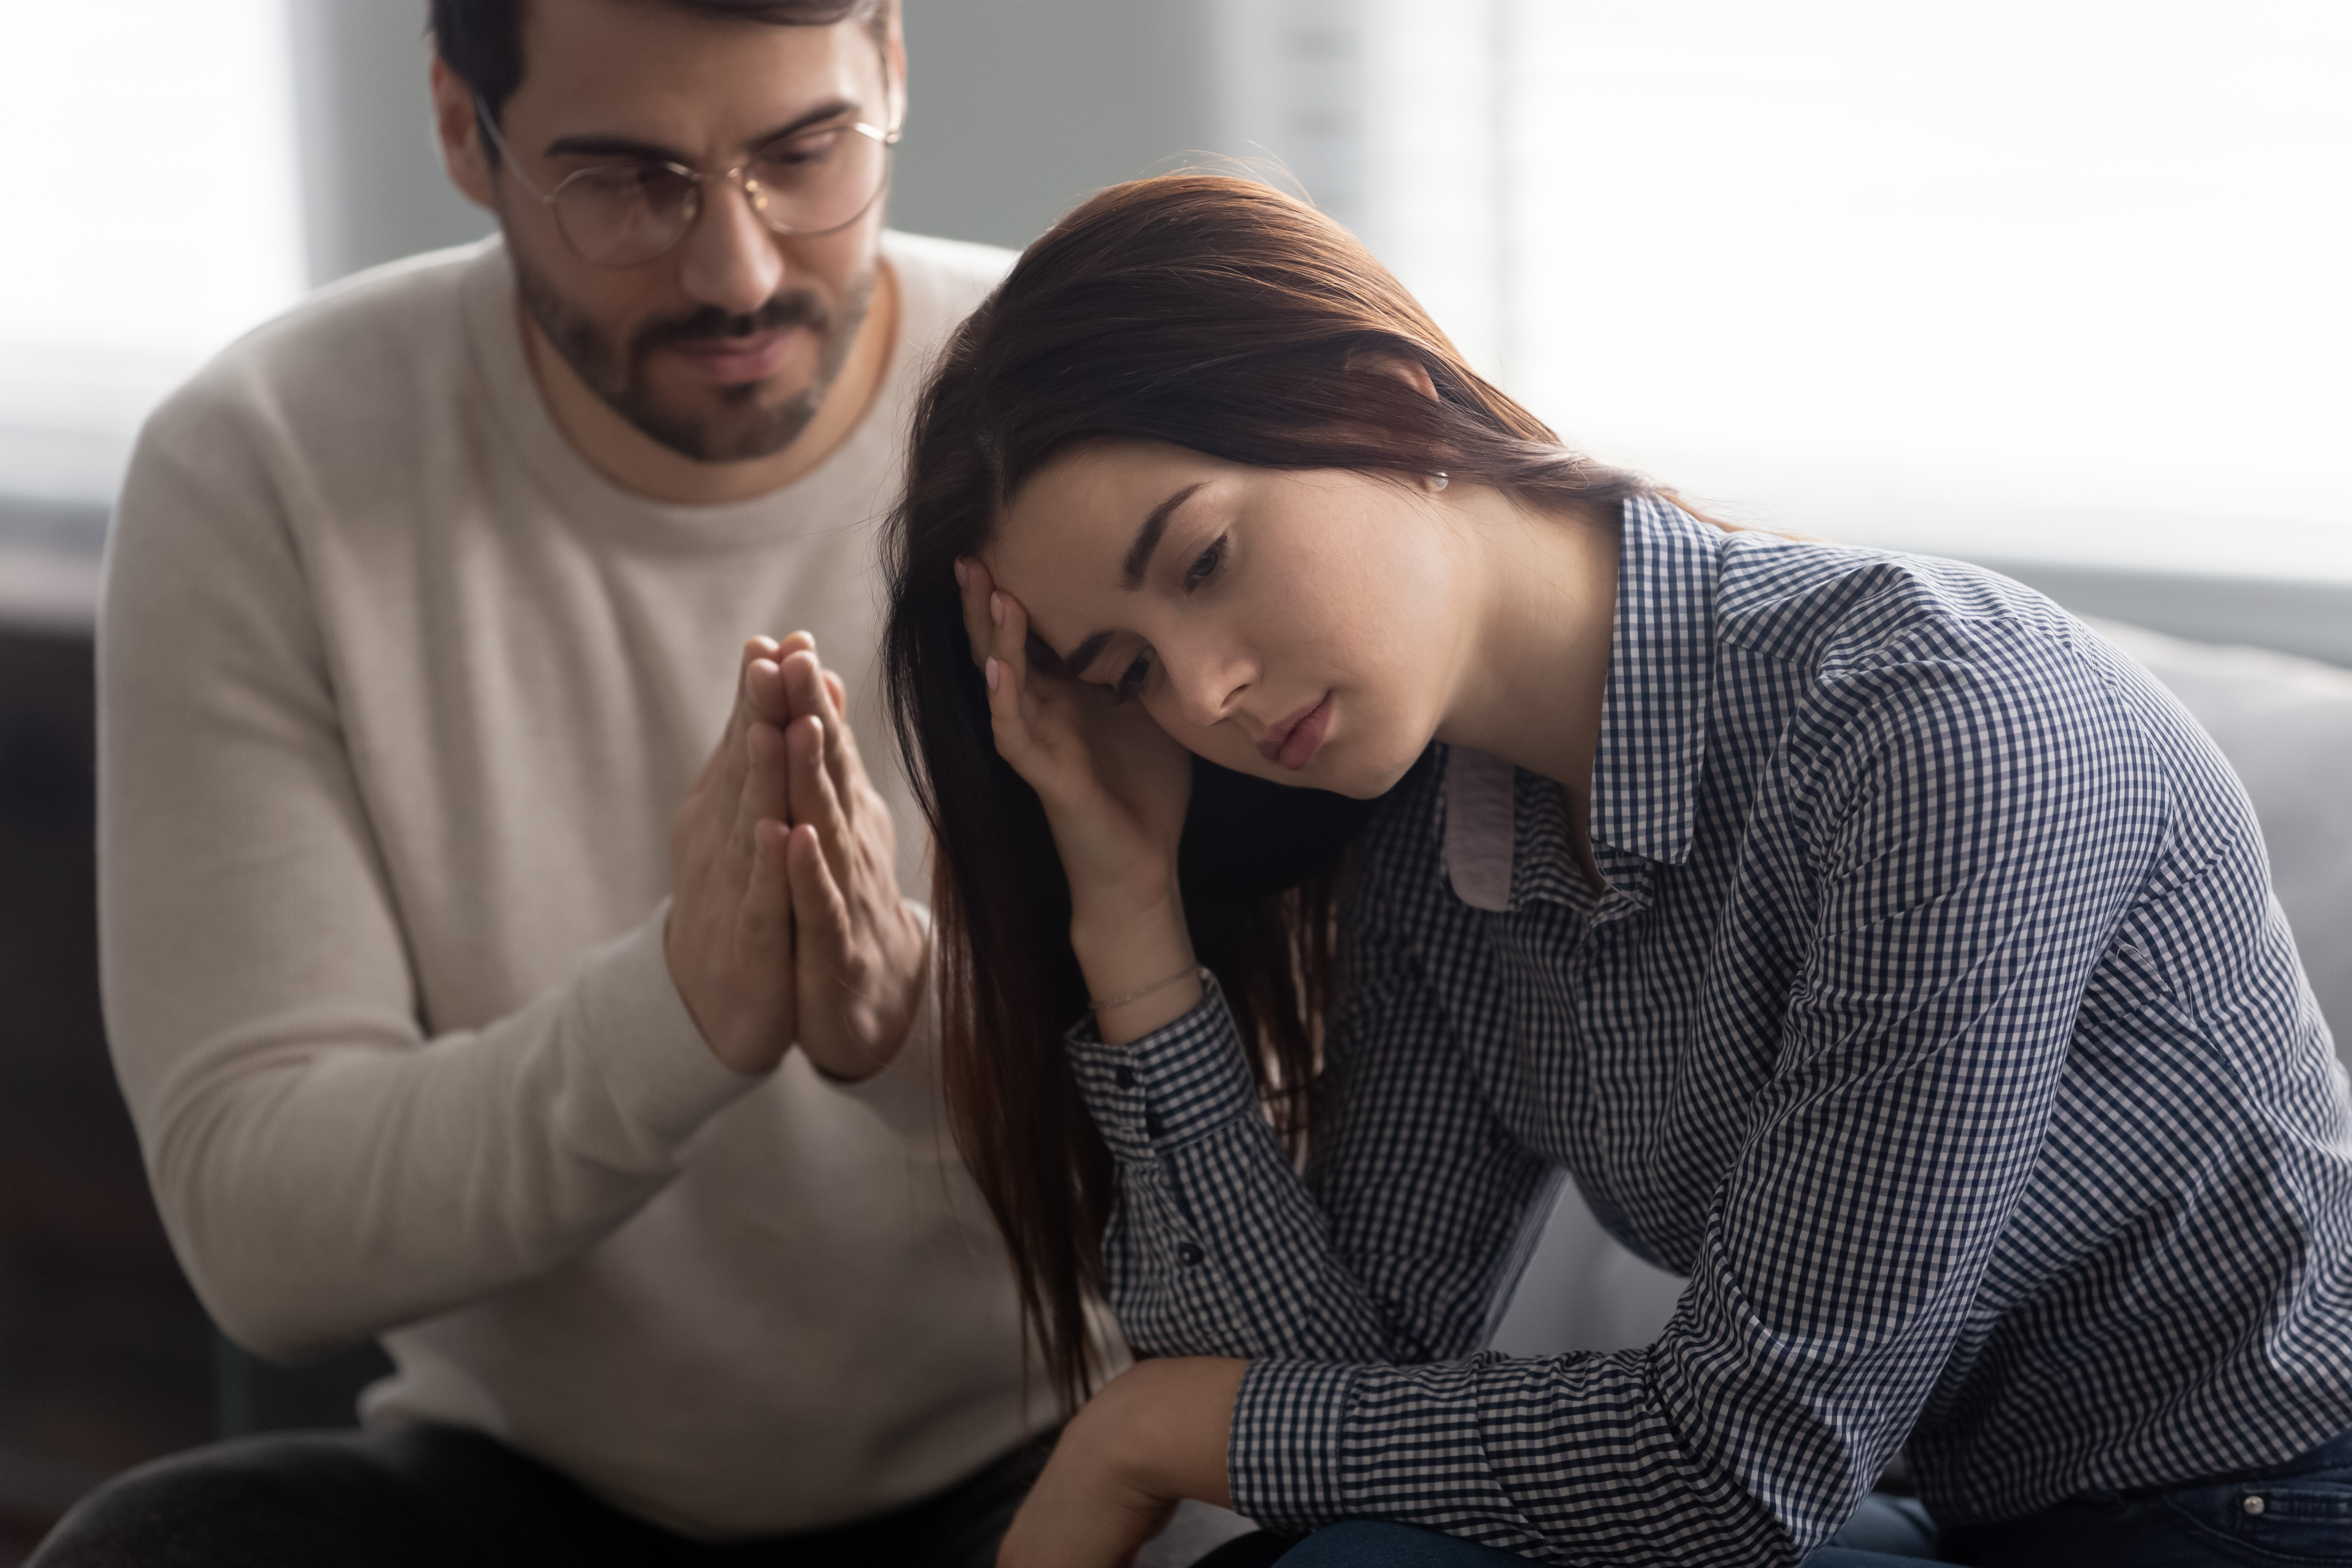 A husband asking for forgiveness from a depressed wife | Source: Shutterstock